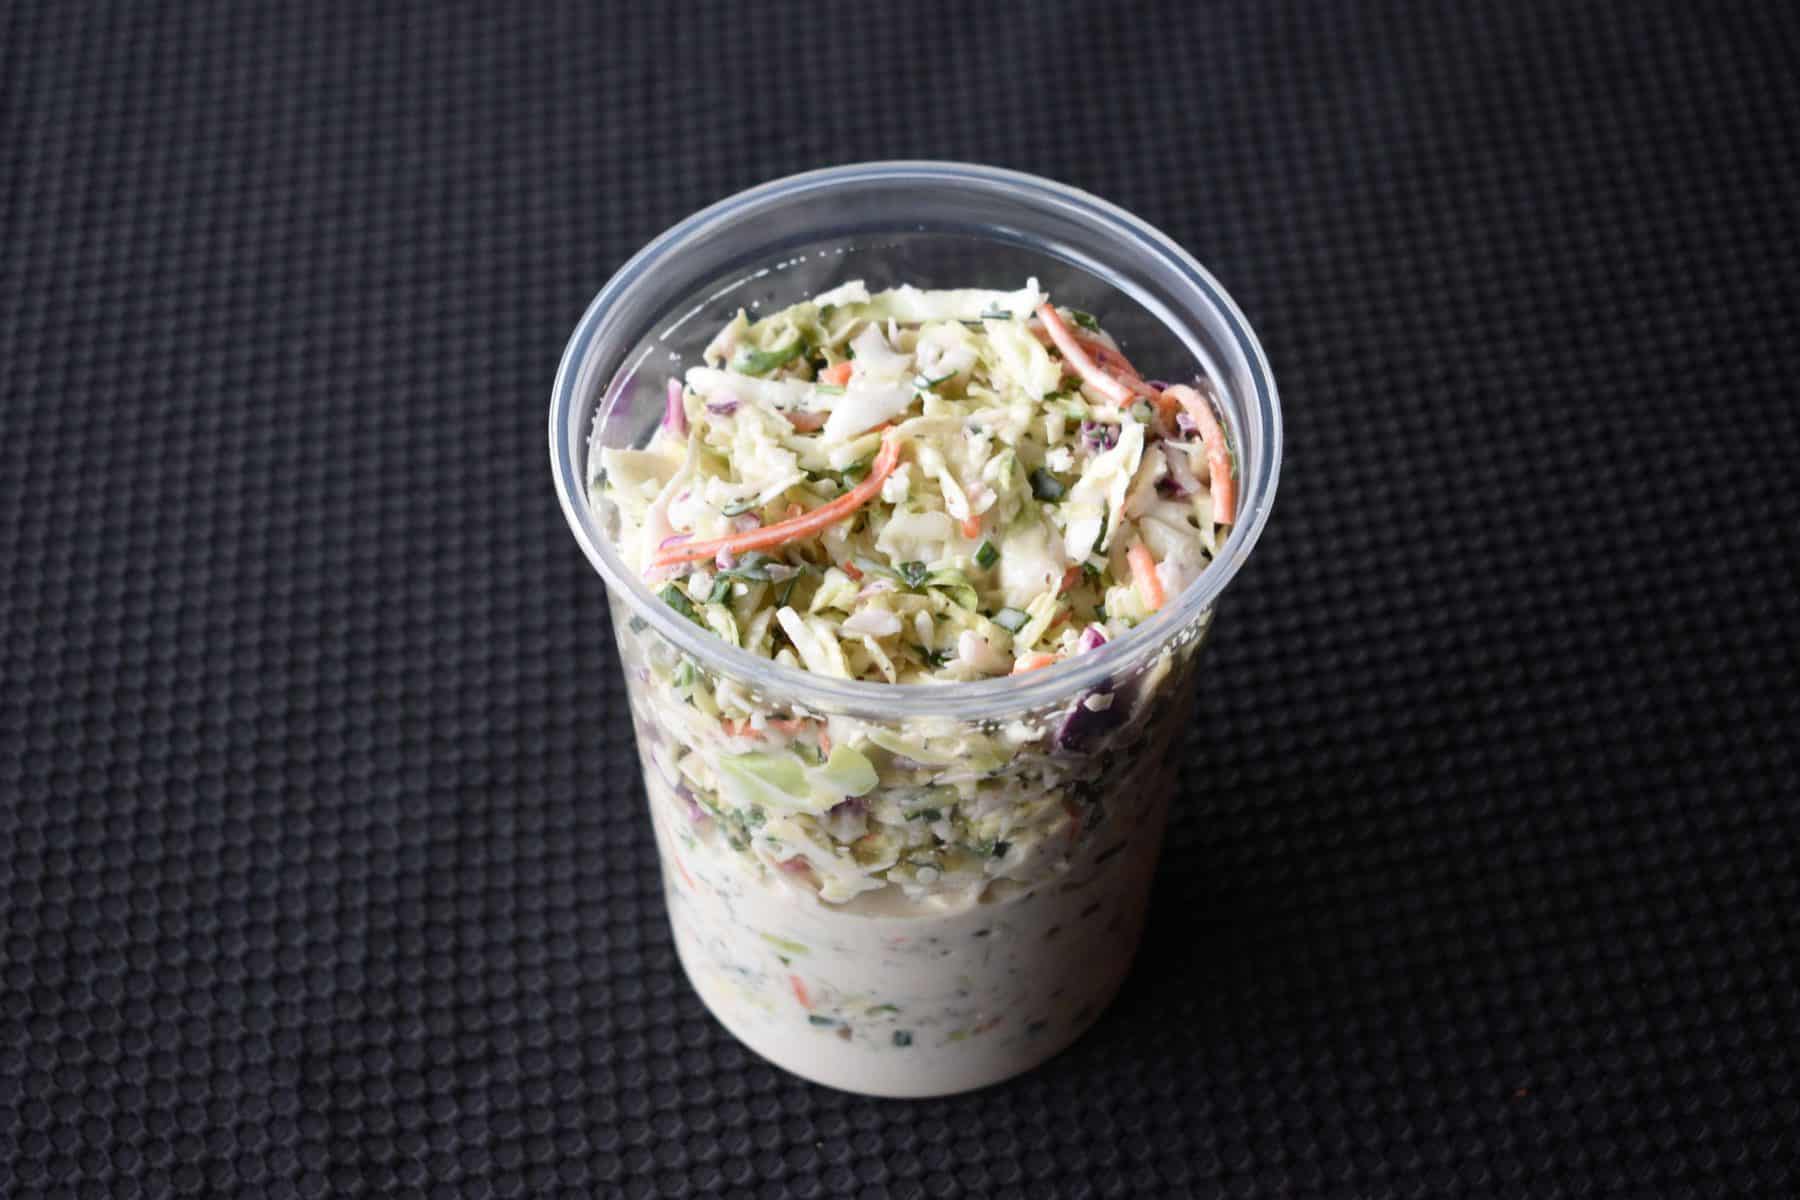 Featured image for “House-Made Coleslaw”